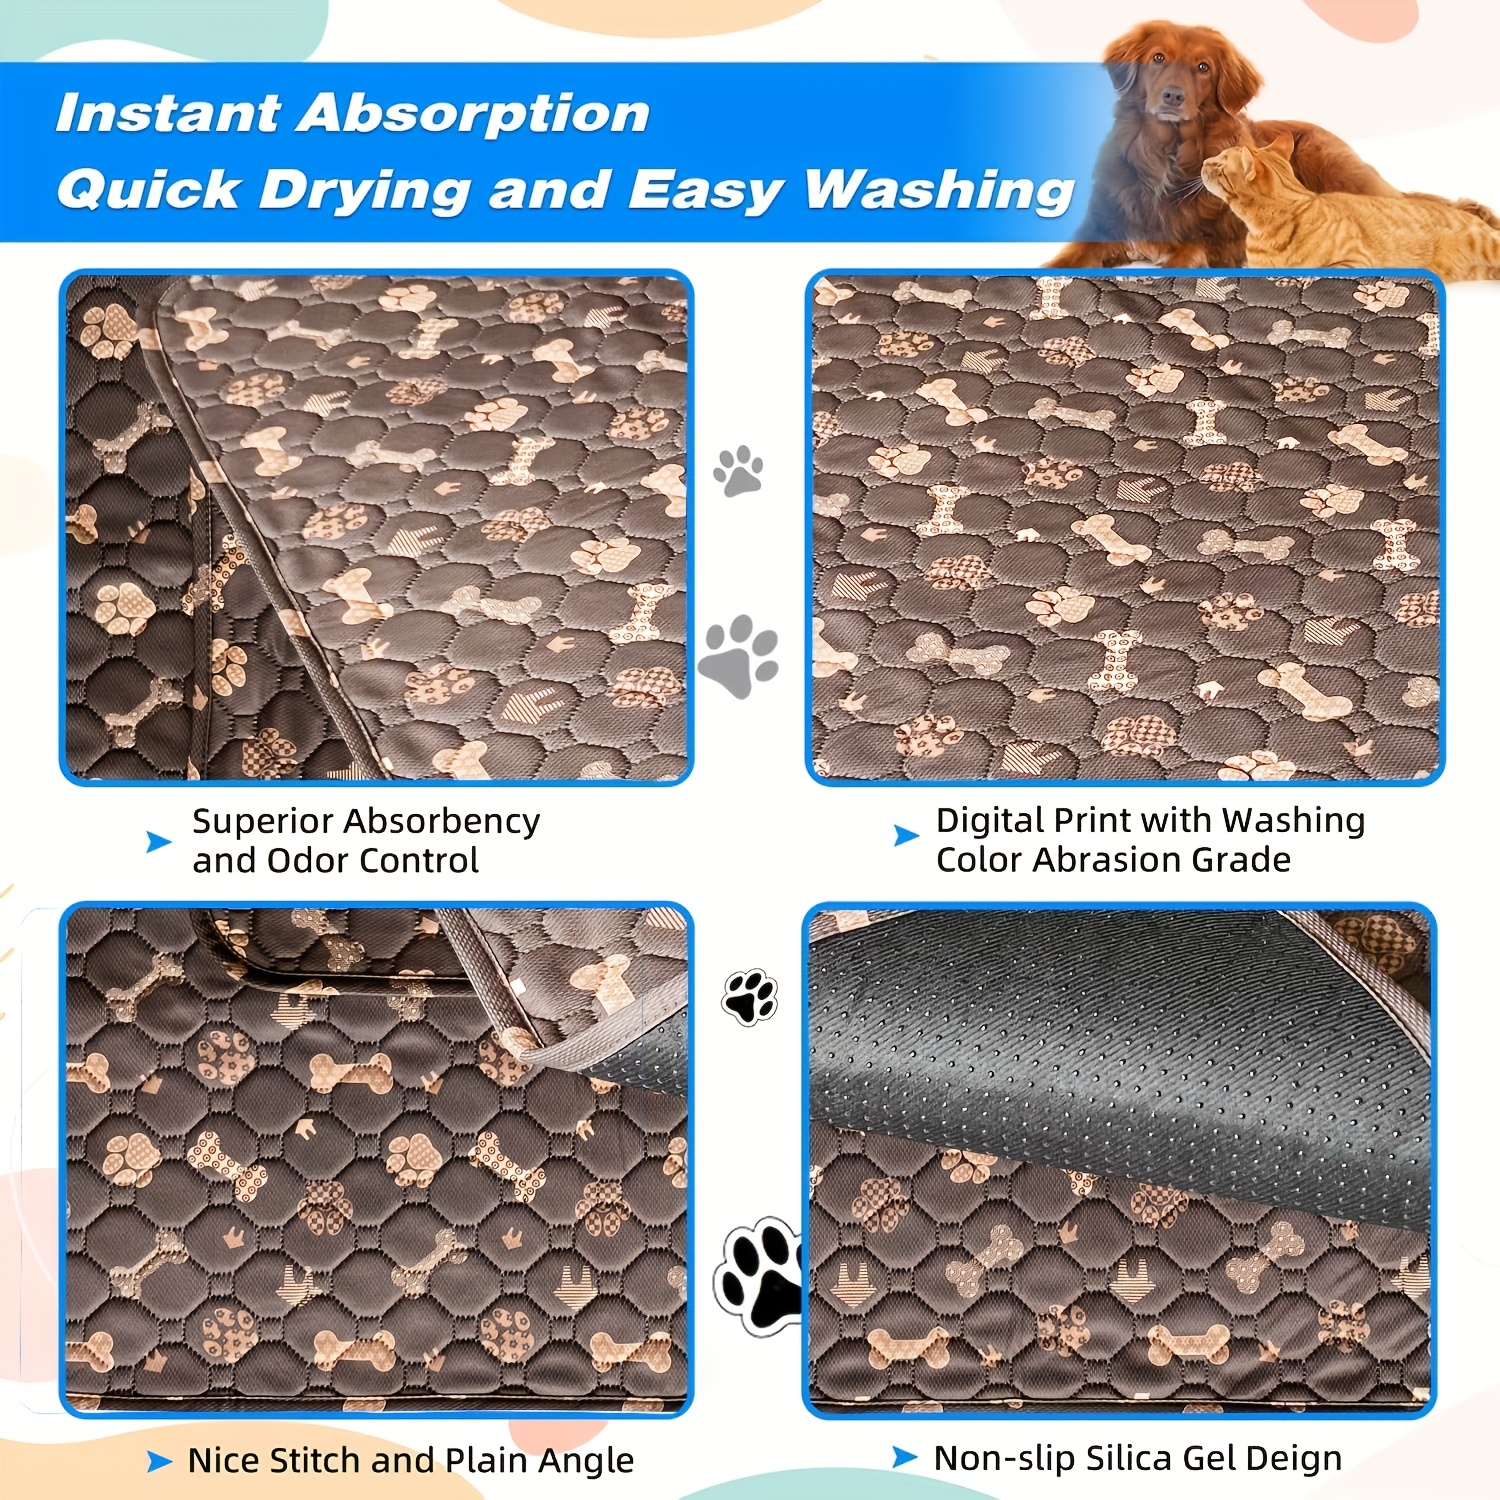 Washable Dog pee Pads, Snagle Paw Pee Pads for Dogs, Extra Large